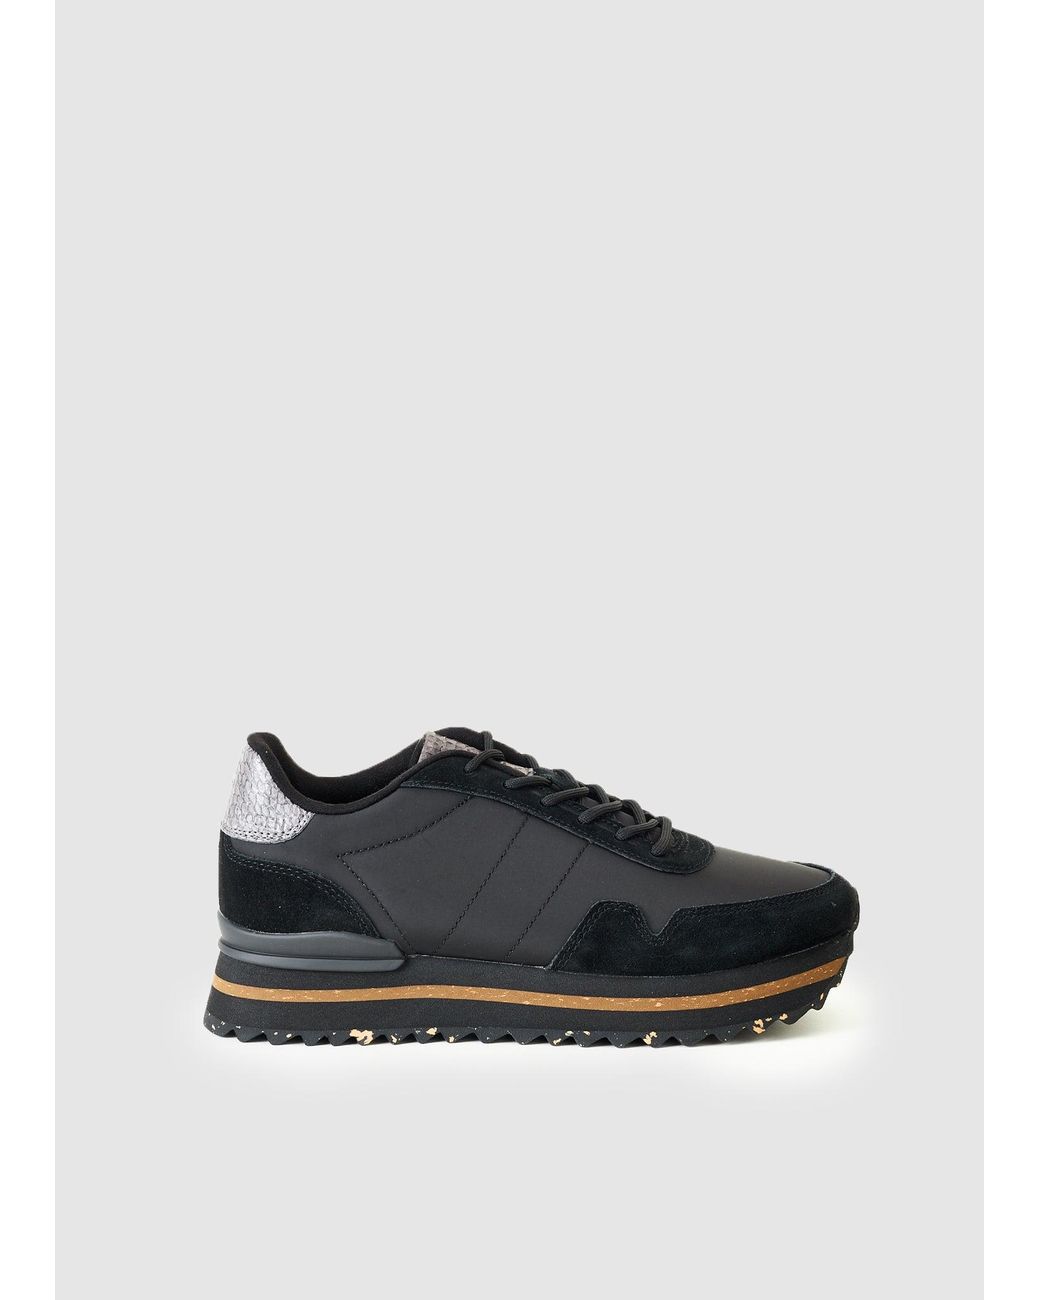 Woden Nora Iii Leather Plateau Trainers in Black | Lyst